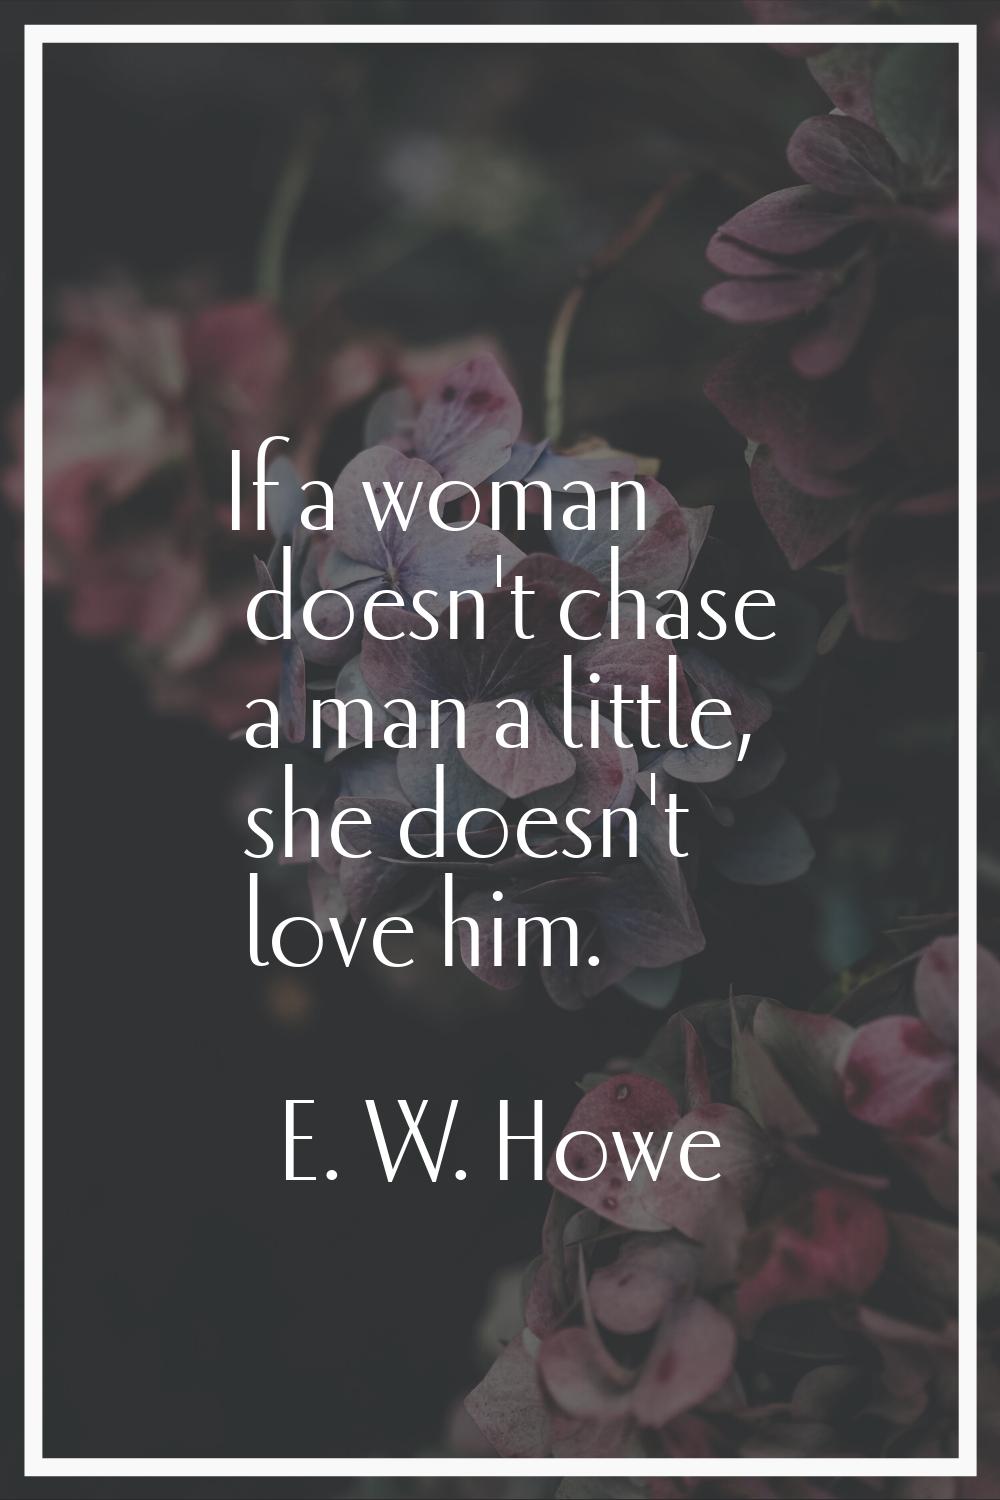 If a woman doesn't chase a man a little, she doesn't love him.